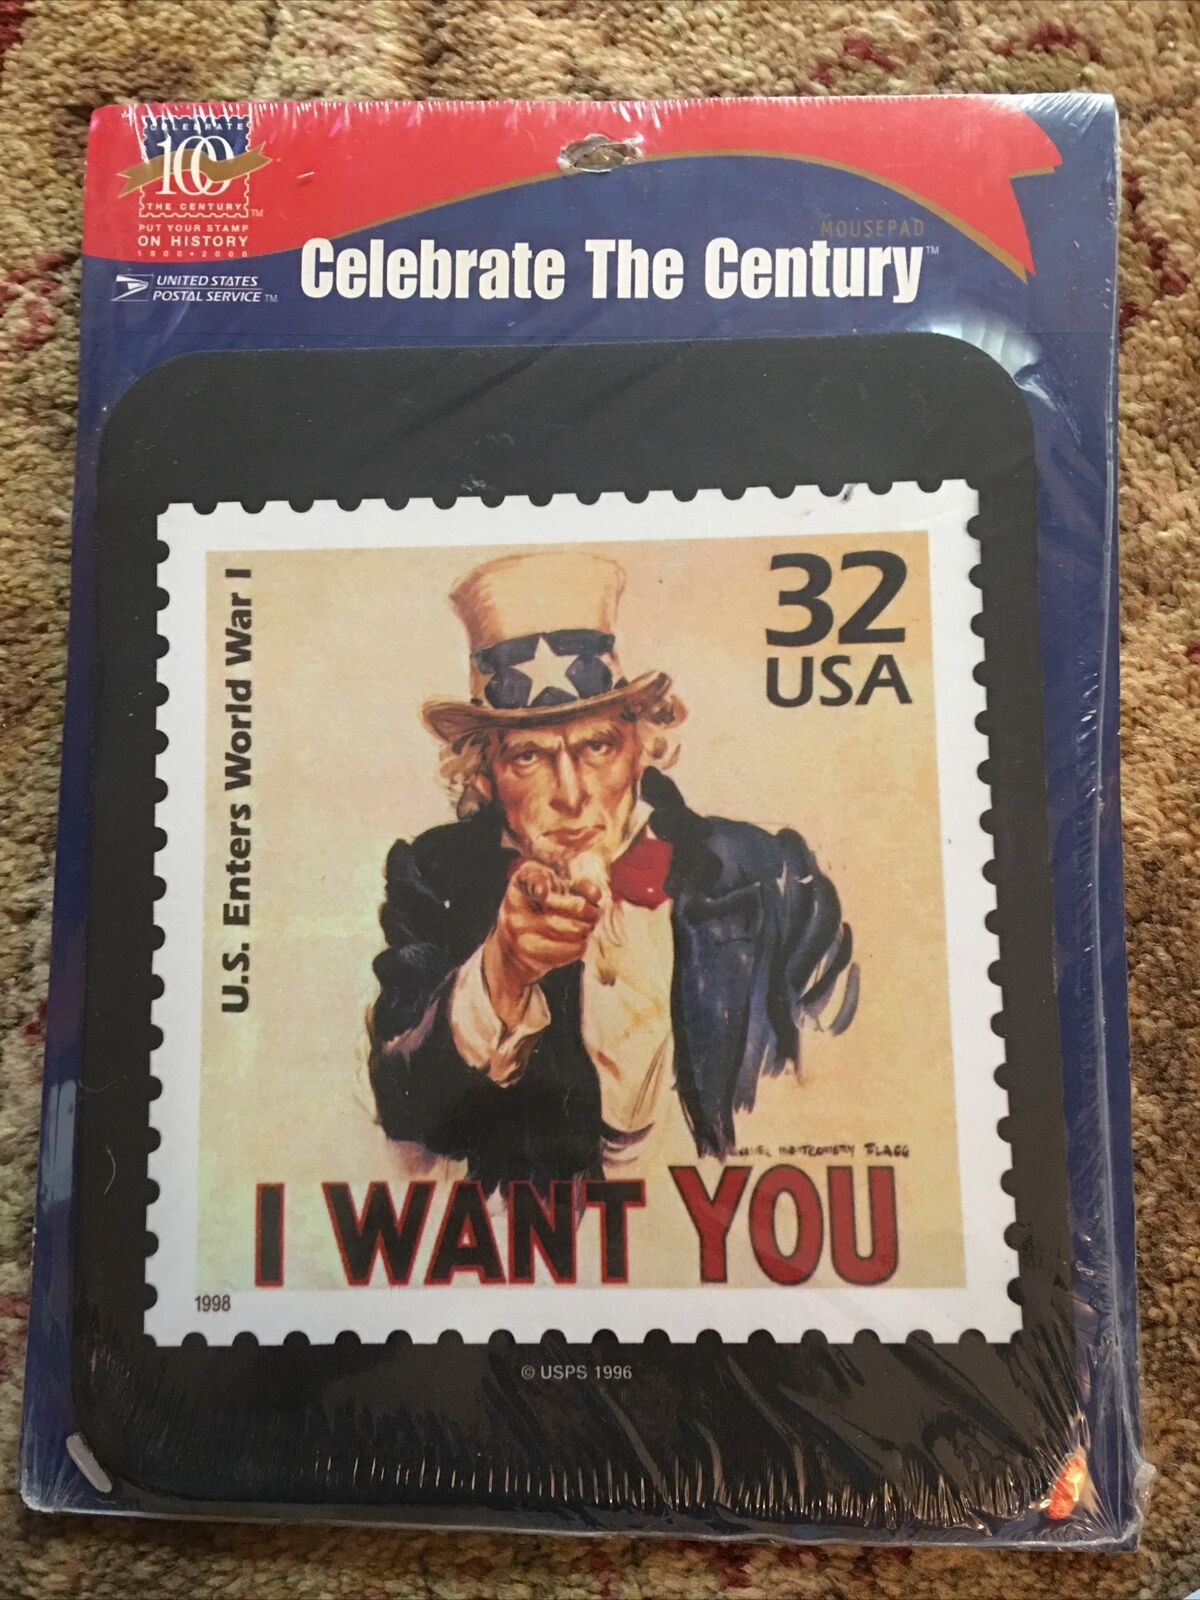 Vintage Mouse Pad “Celebrate The Century” I Want You Uncle Sam USPS from 1996